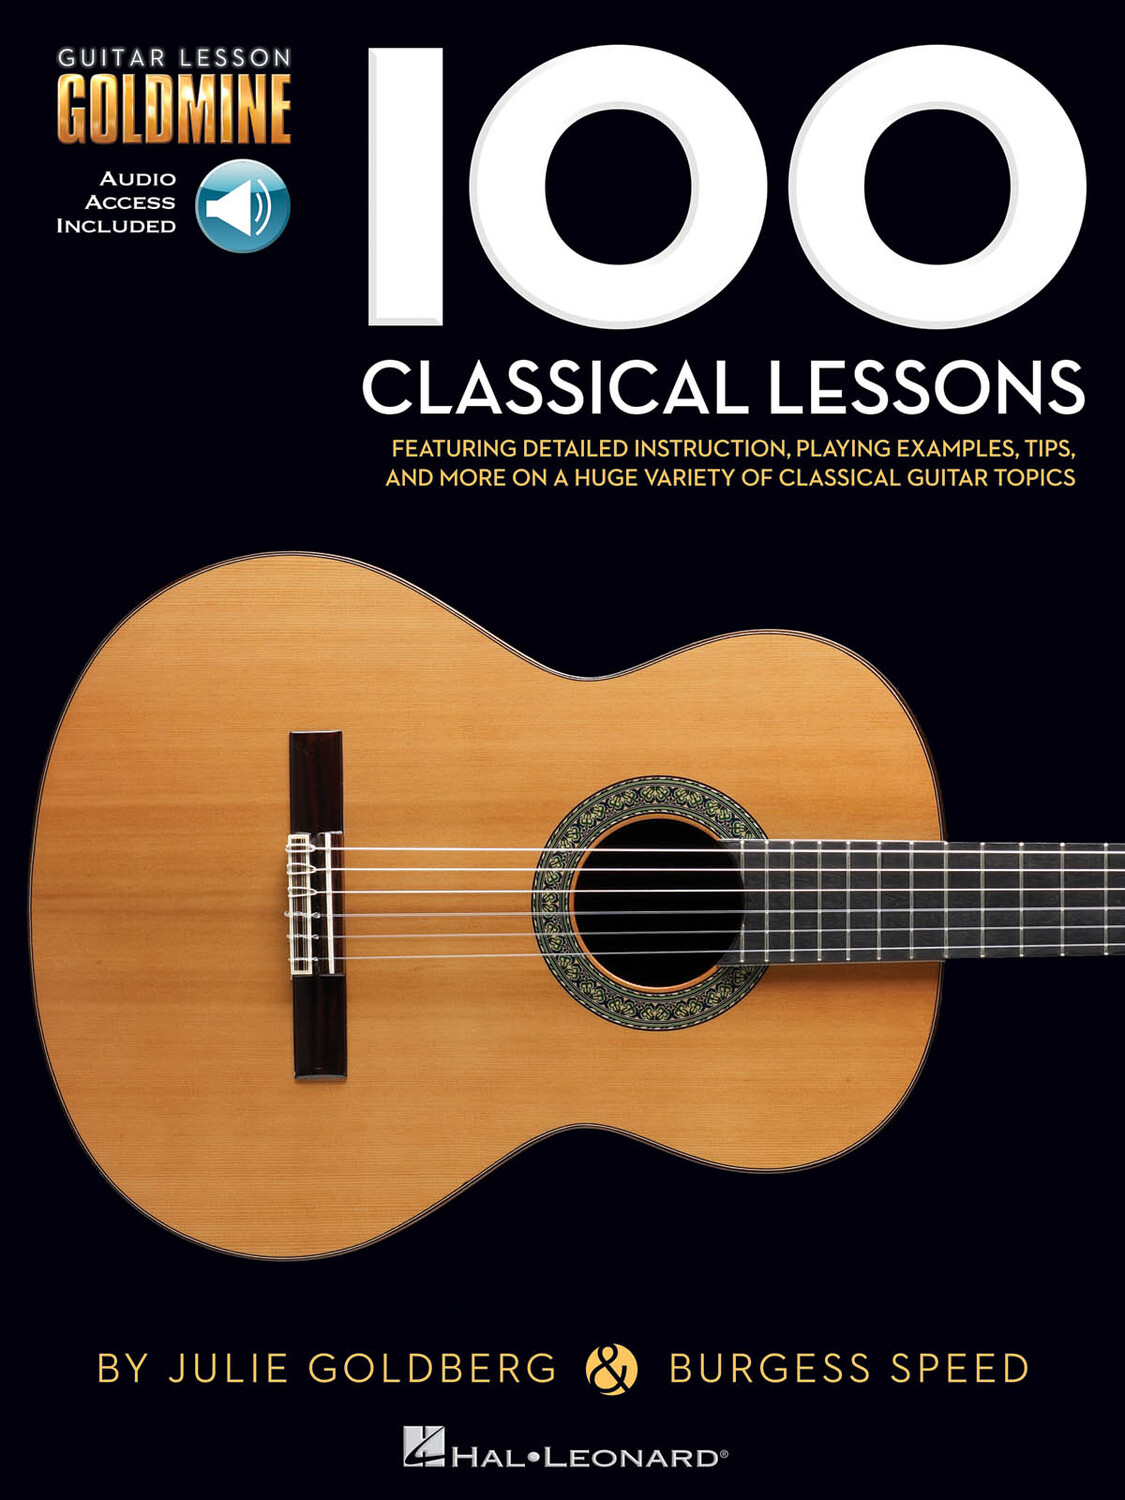 Cover: 888680066864 | 100 Classical Lessons | Guitar Lesson Goldmine Series | 2017